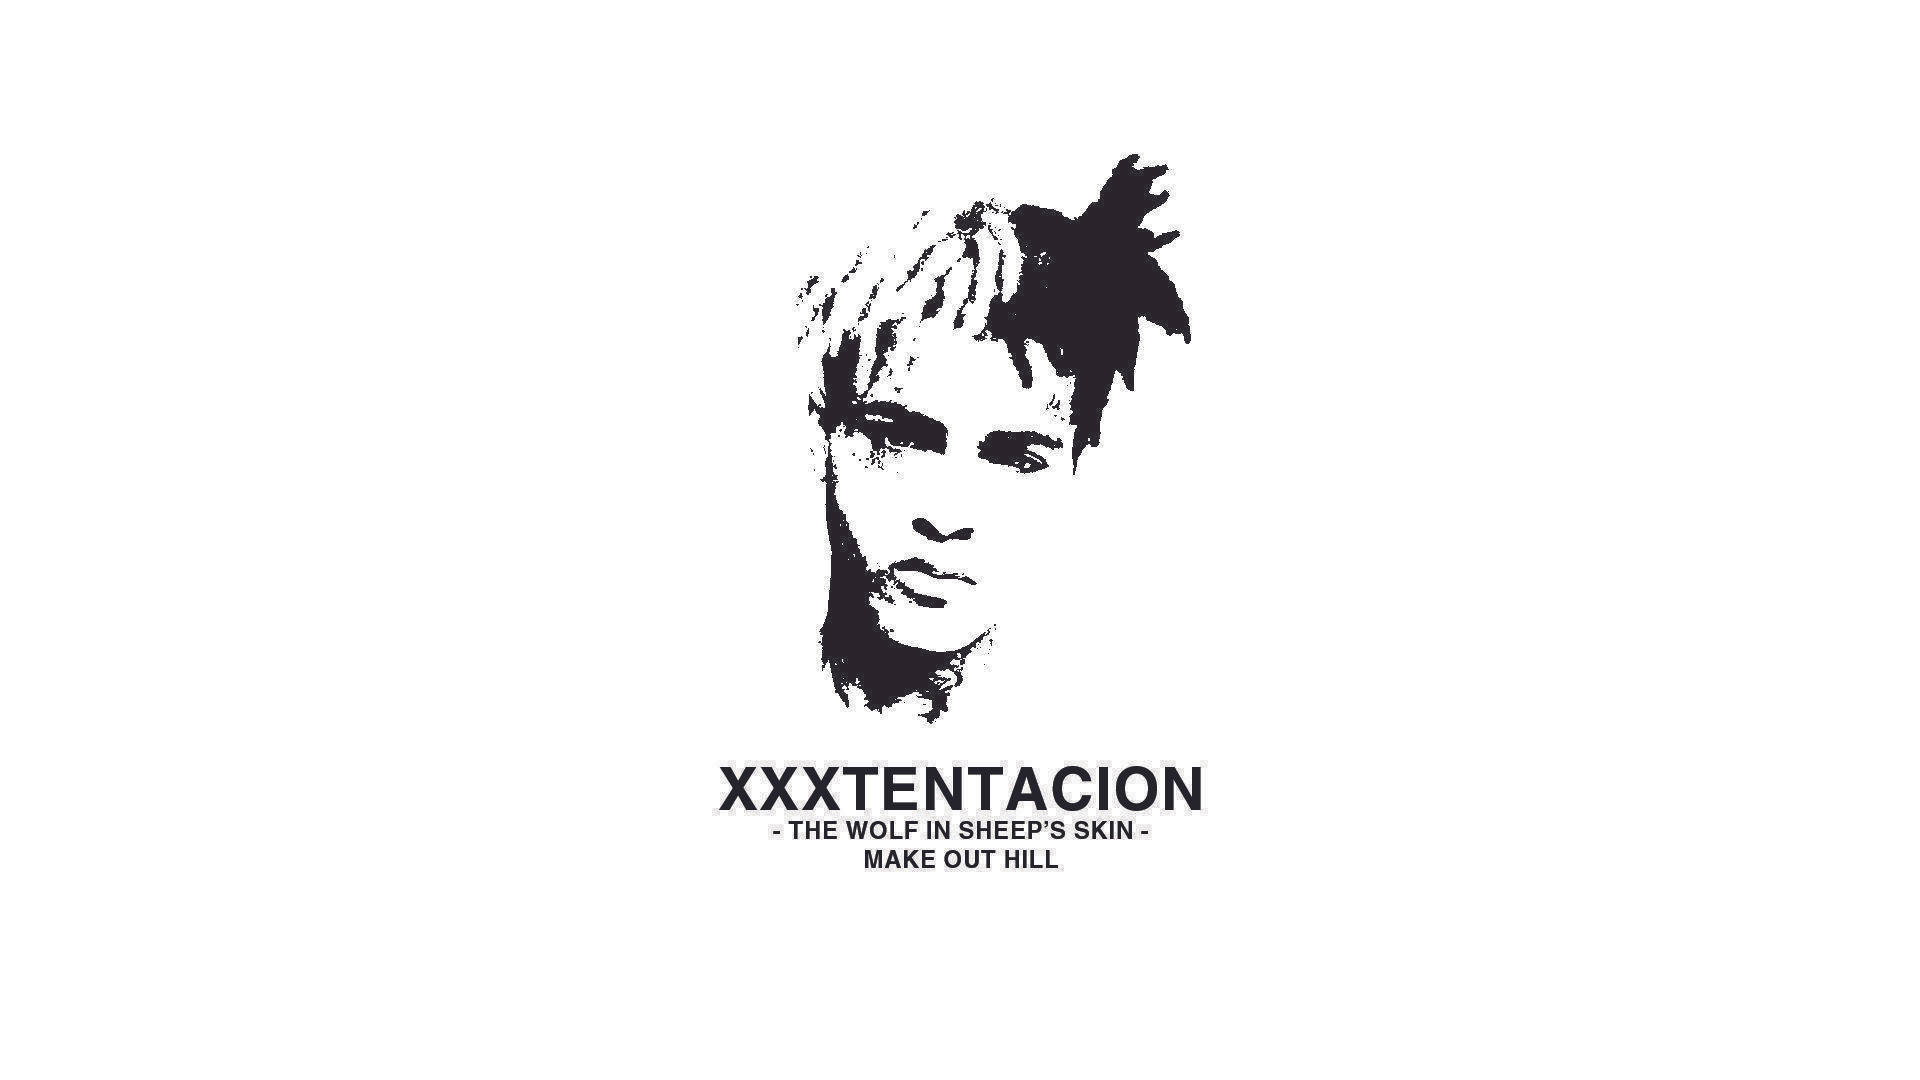 Strong Portrait Of Xx Tentacion In Black And White